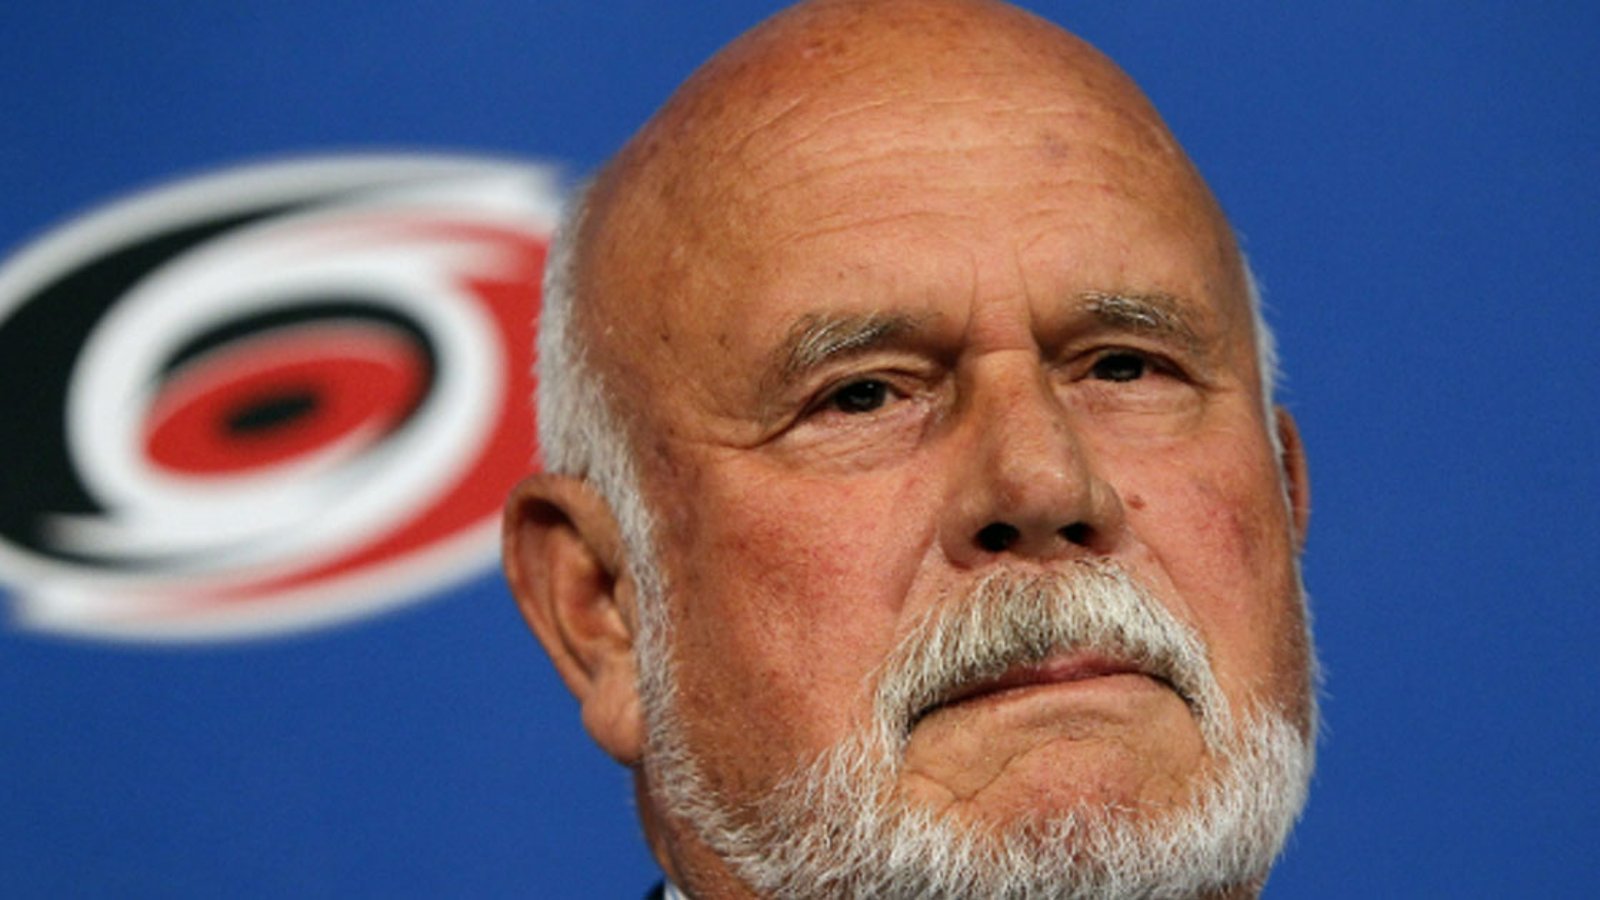 The Hurricanes finally sold?!